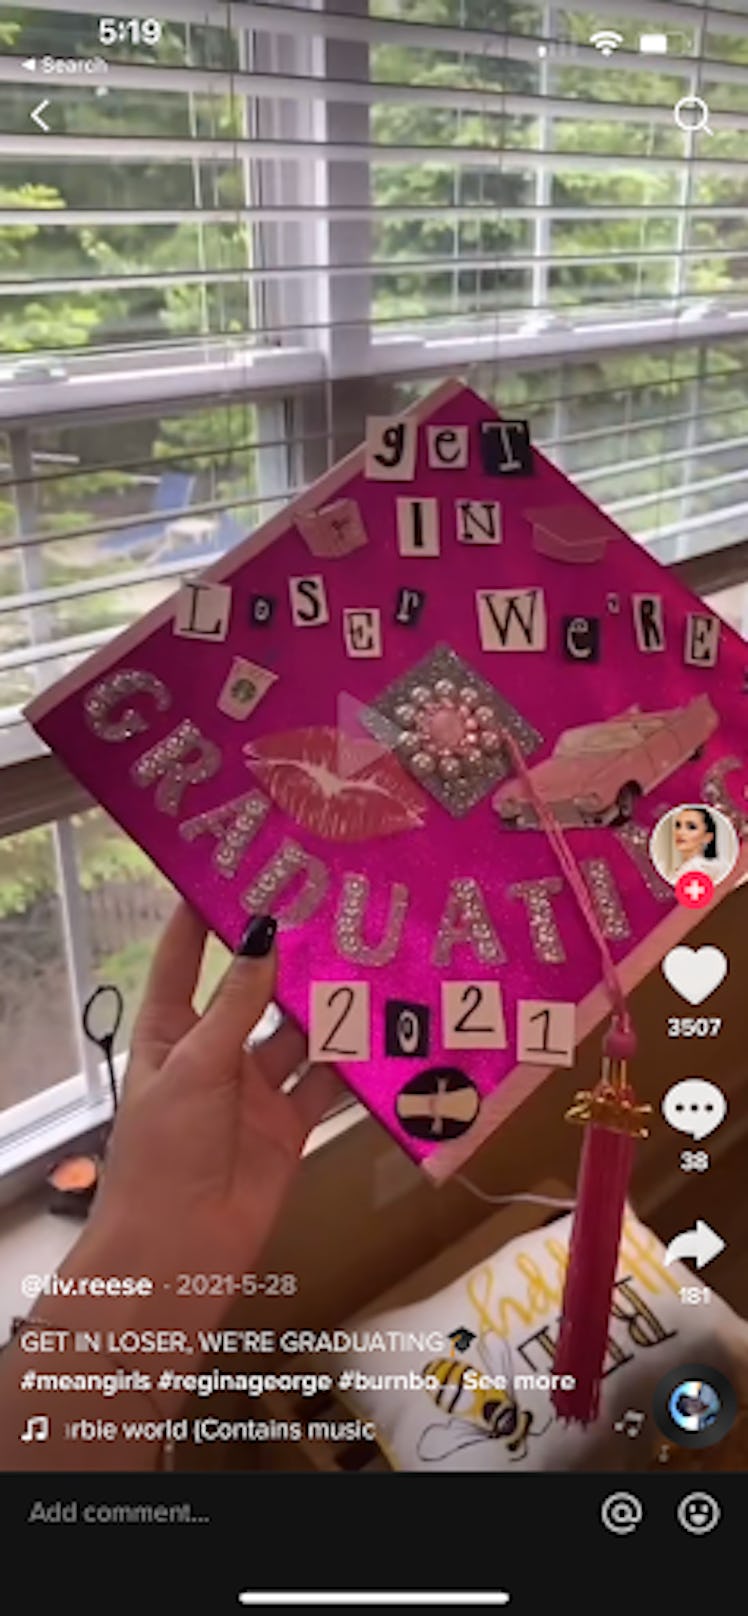 These funny college graduation caps include sayings from Mean Girls.